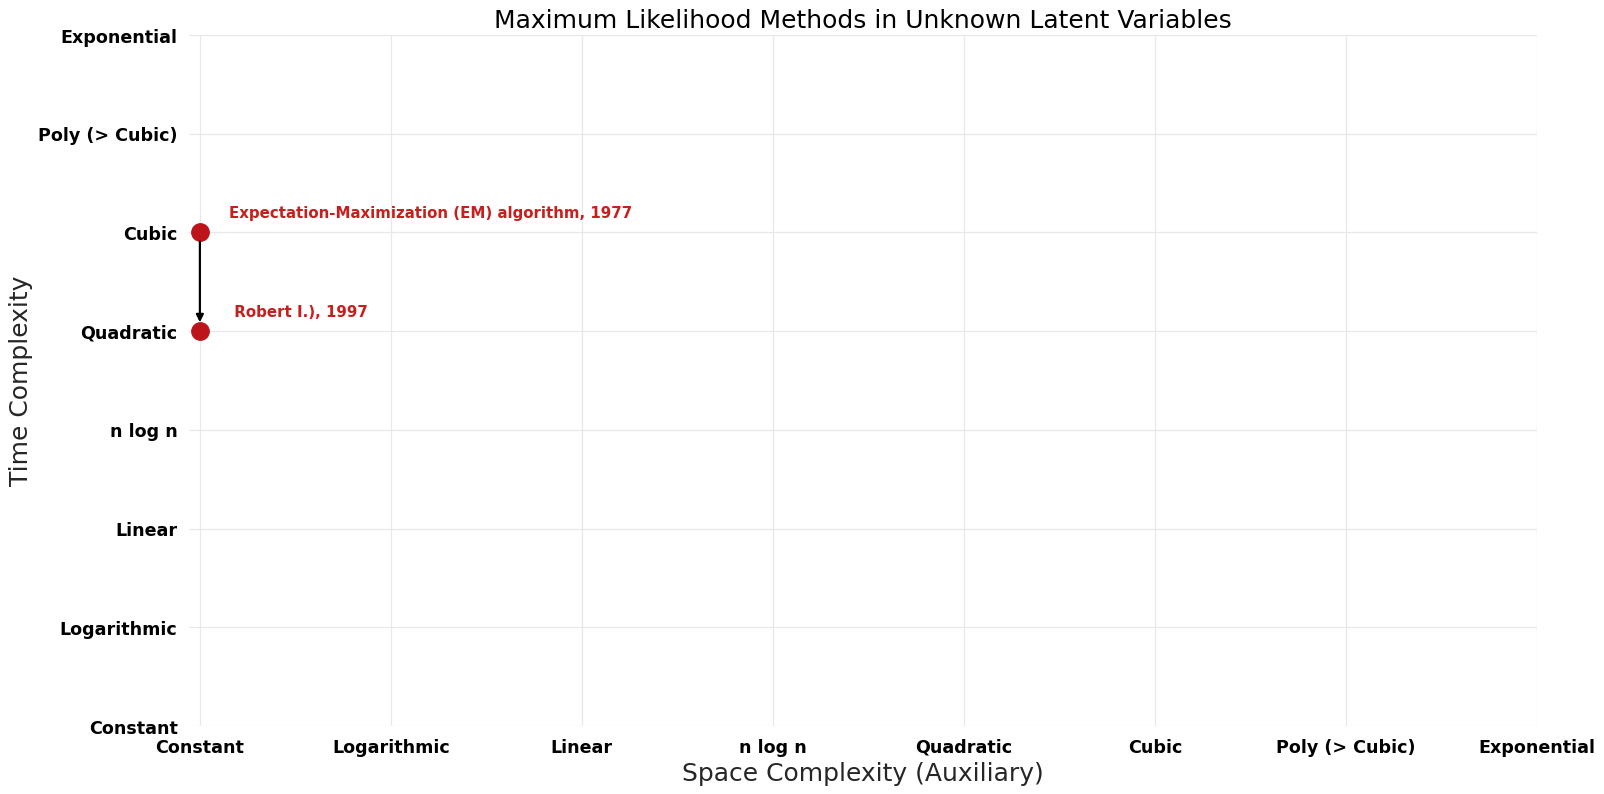 Maximum Likelihood Methods in Unknown Latent Variables - Pareto Frontier.png